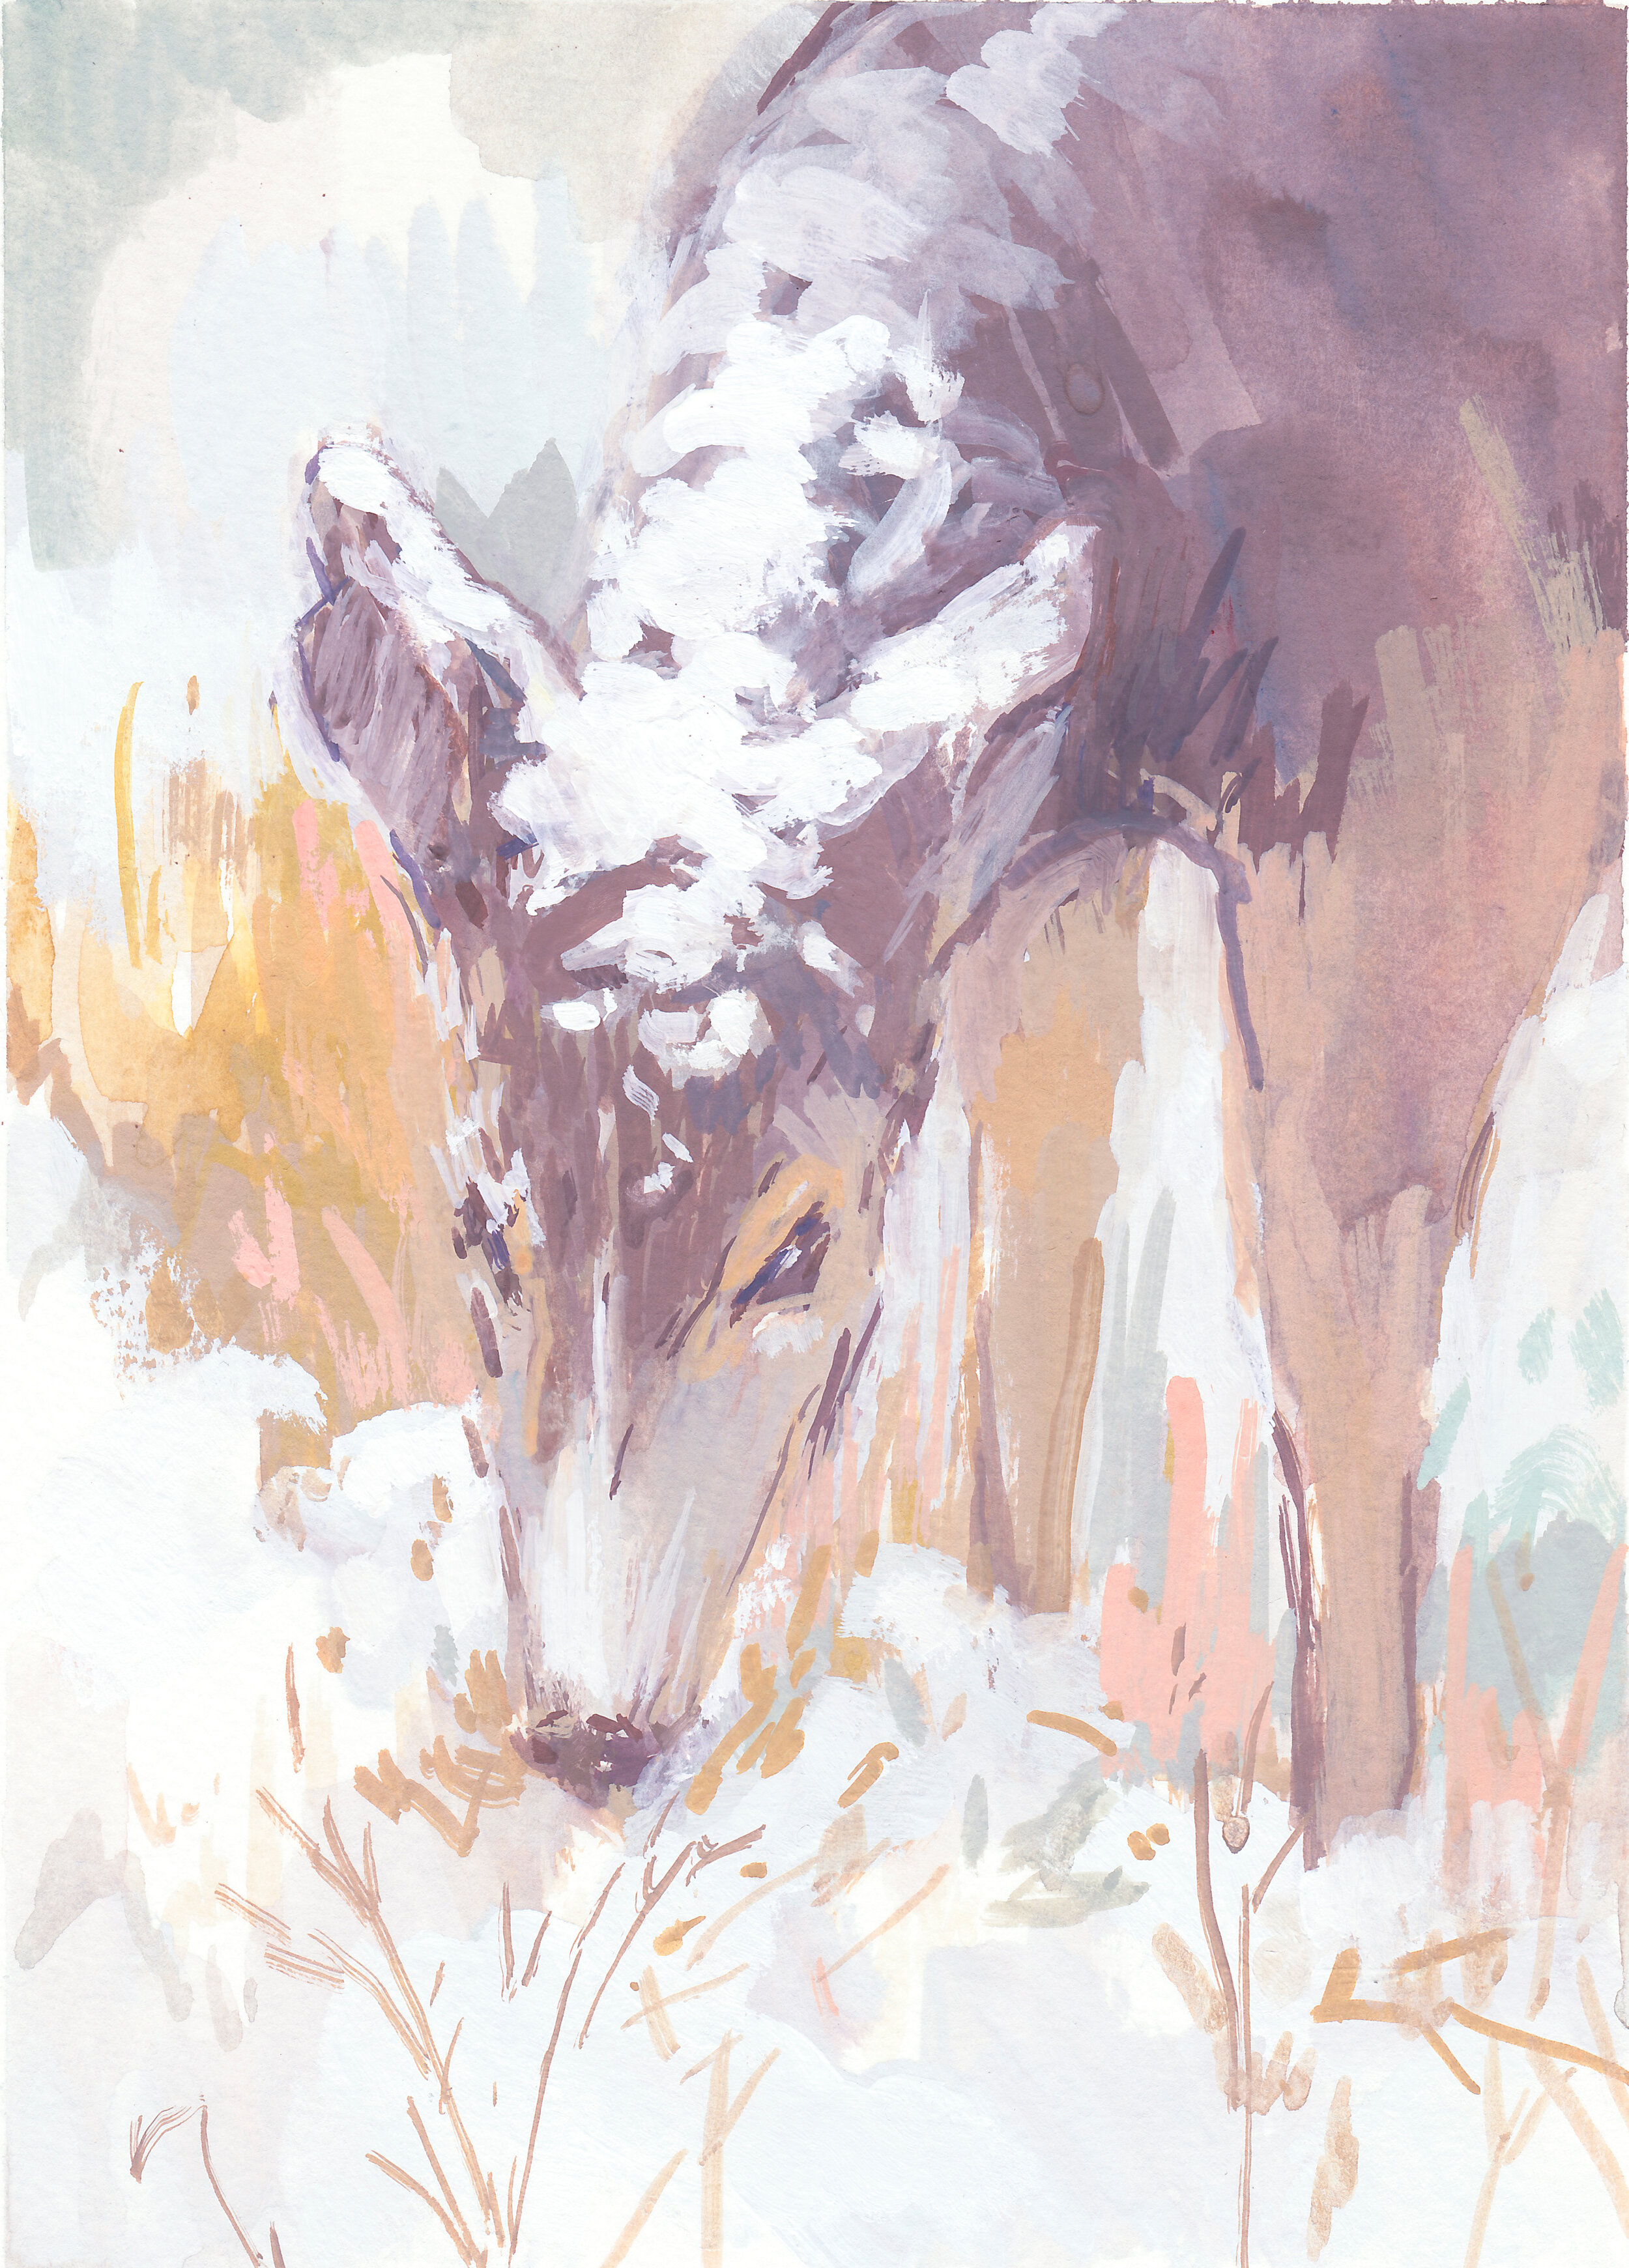    winter deer   gouache on paper 8 x 6” 2016  private collection Wyoming  prints available for purchase  